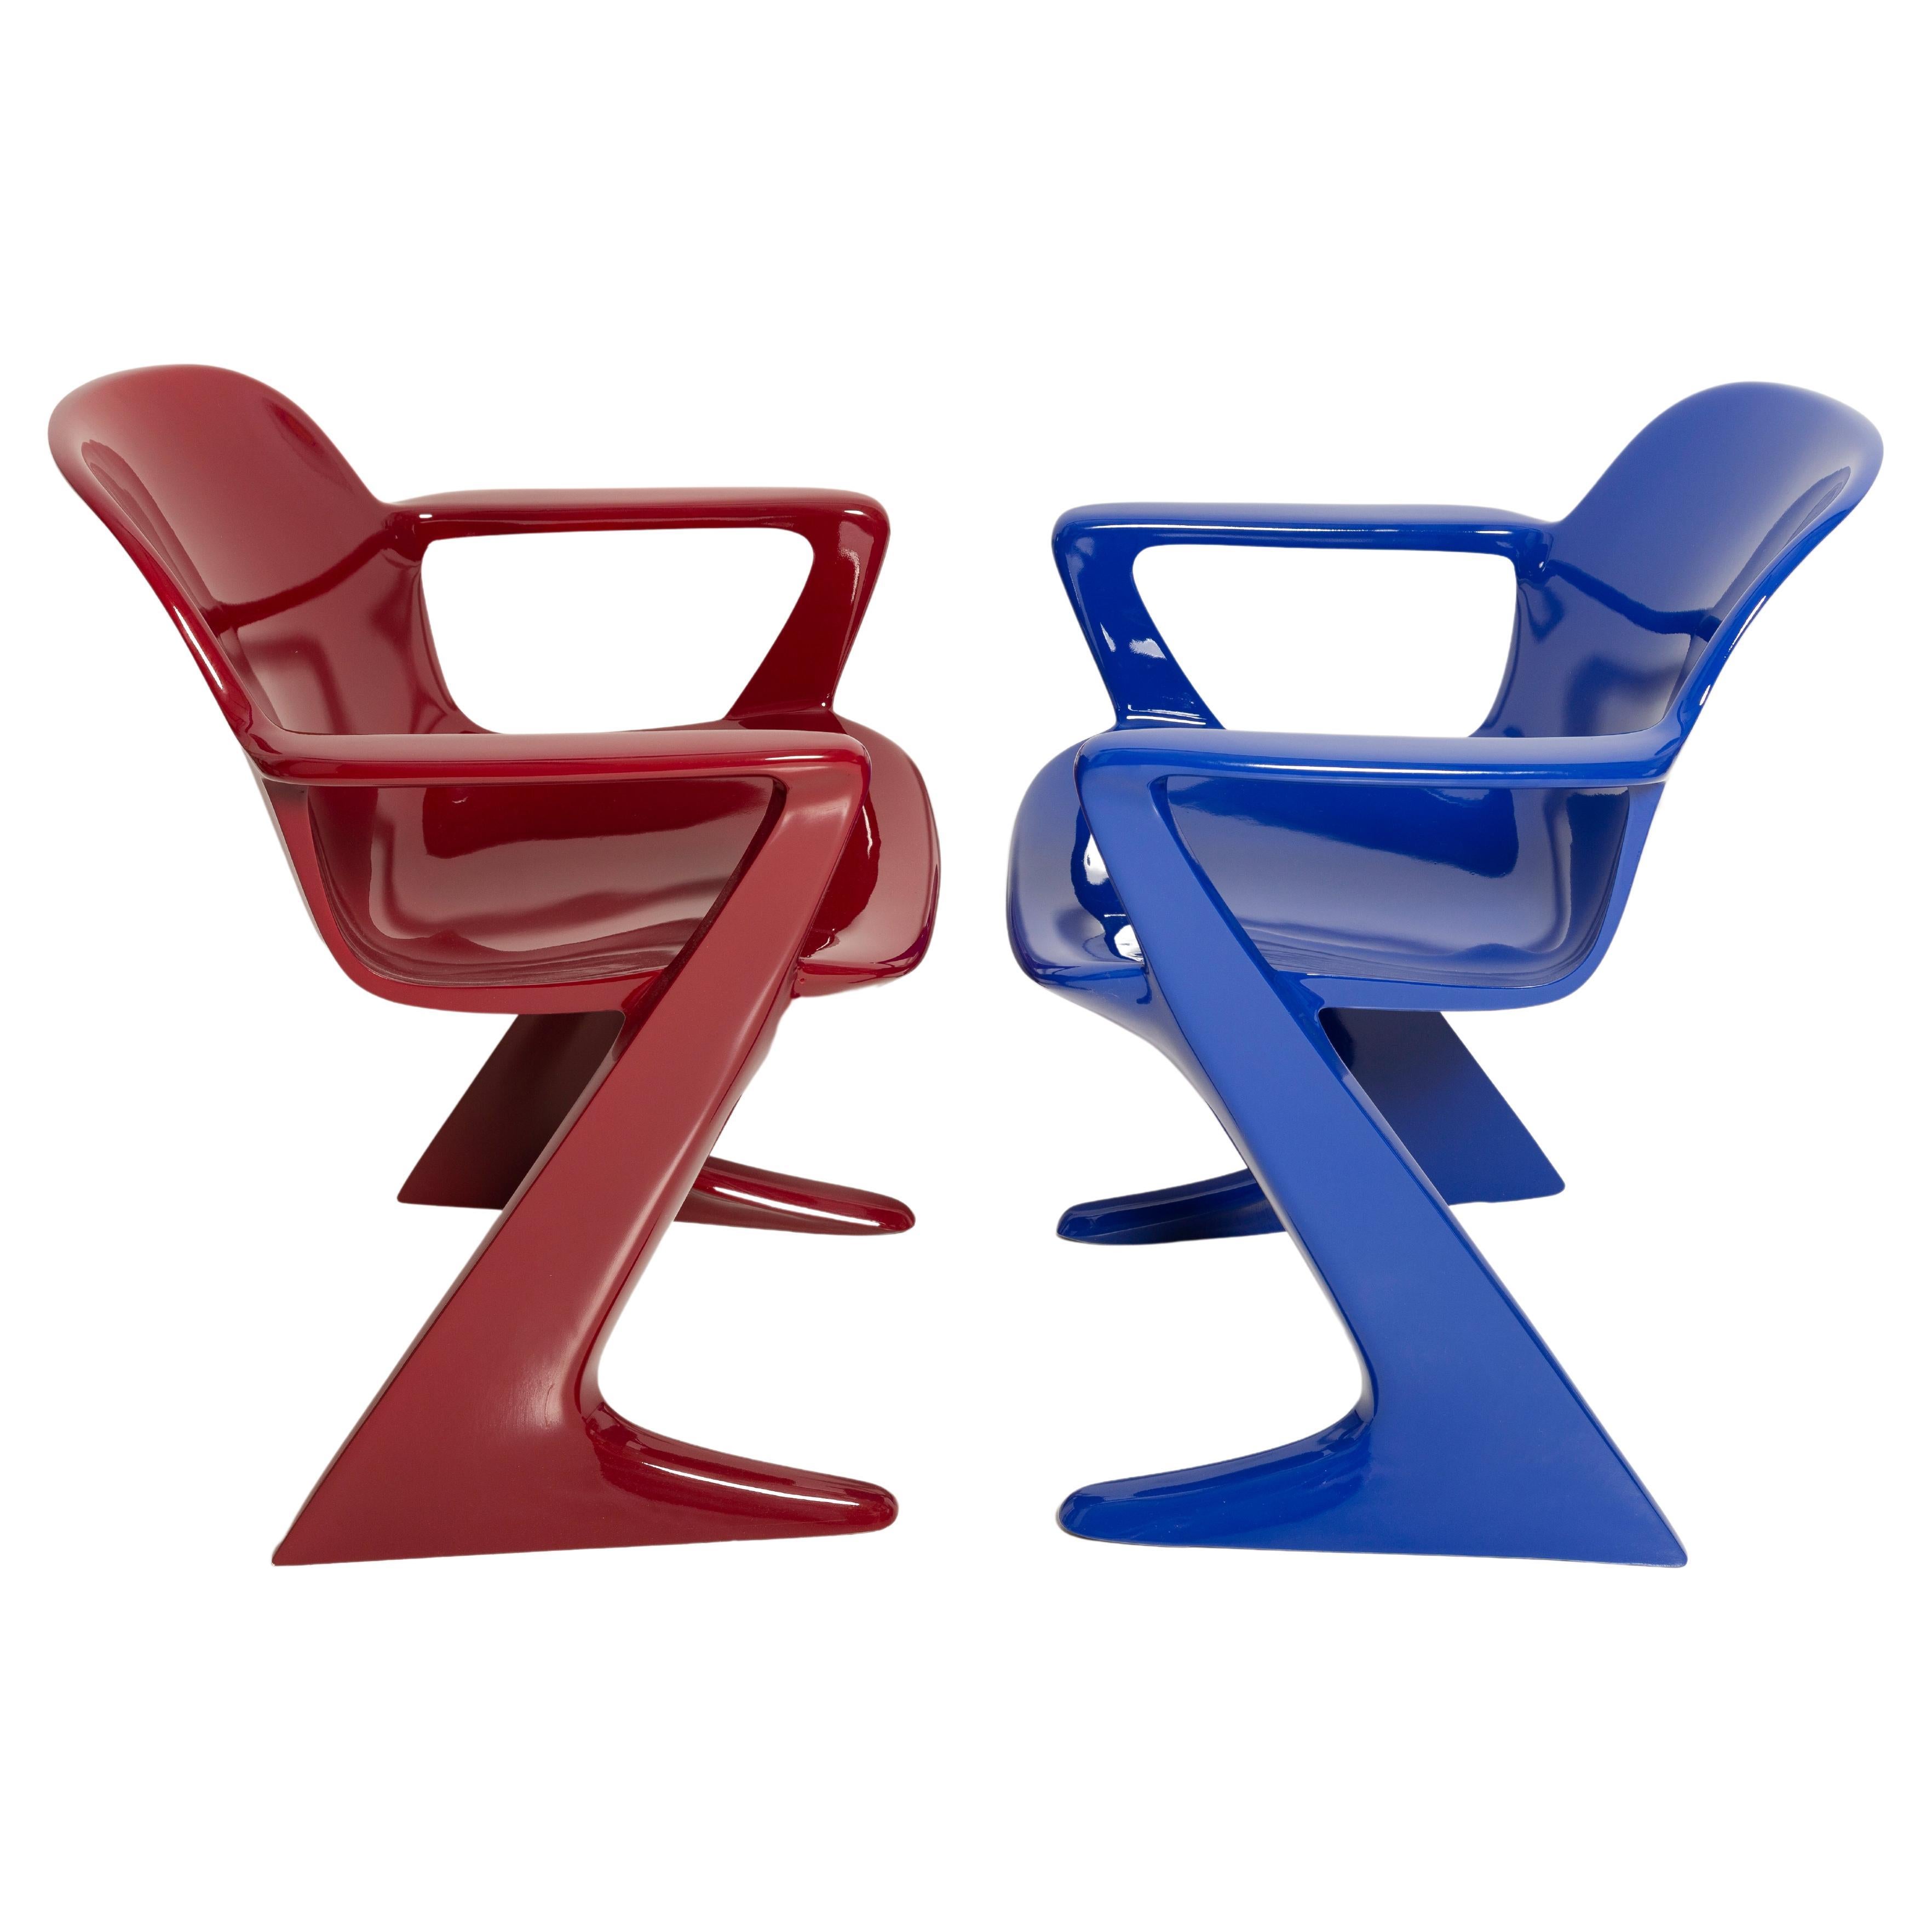 Two Mid-Century Burgundy Red and Blue Kangaroo Chairs Ernst Moeckl Germany, 1968